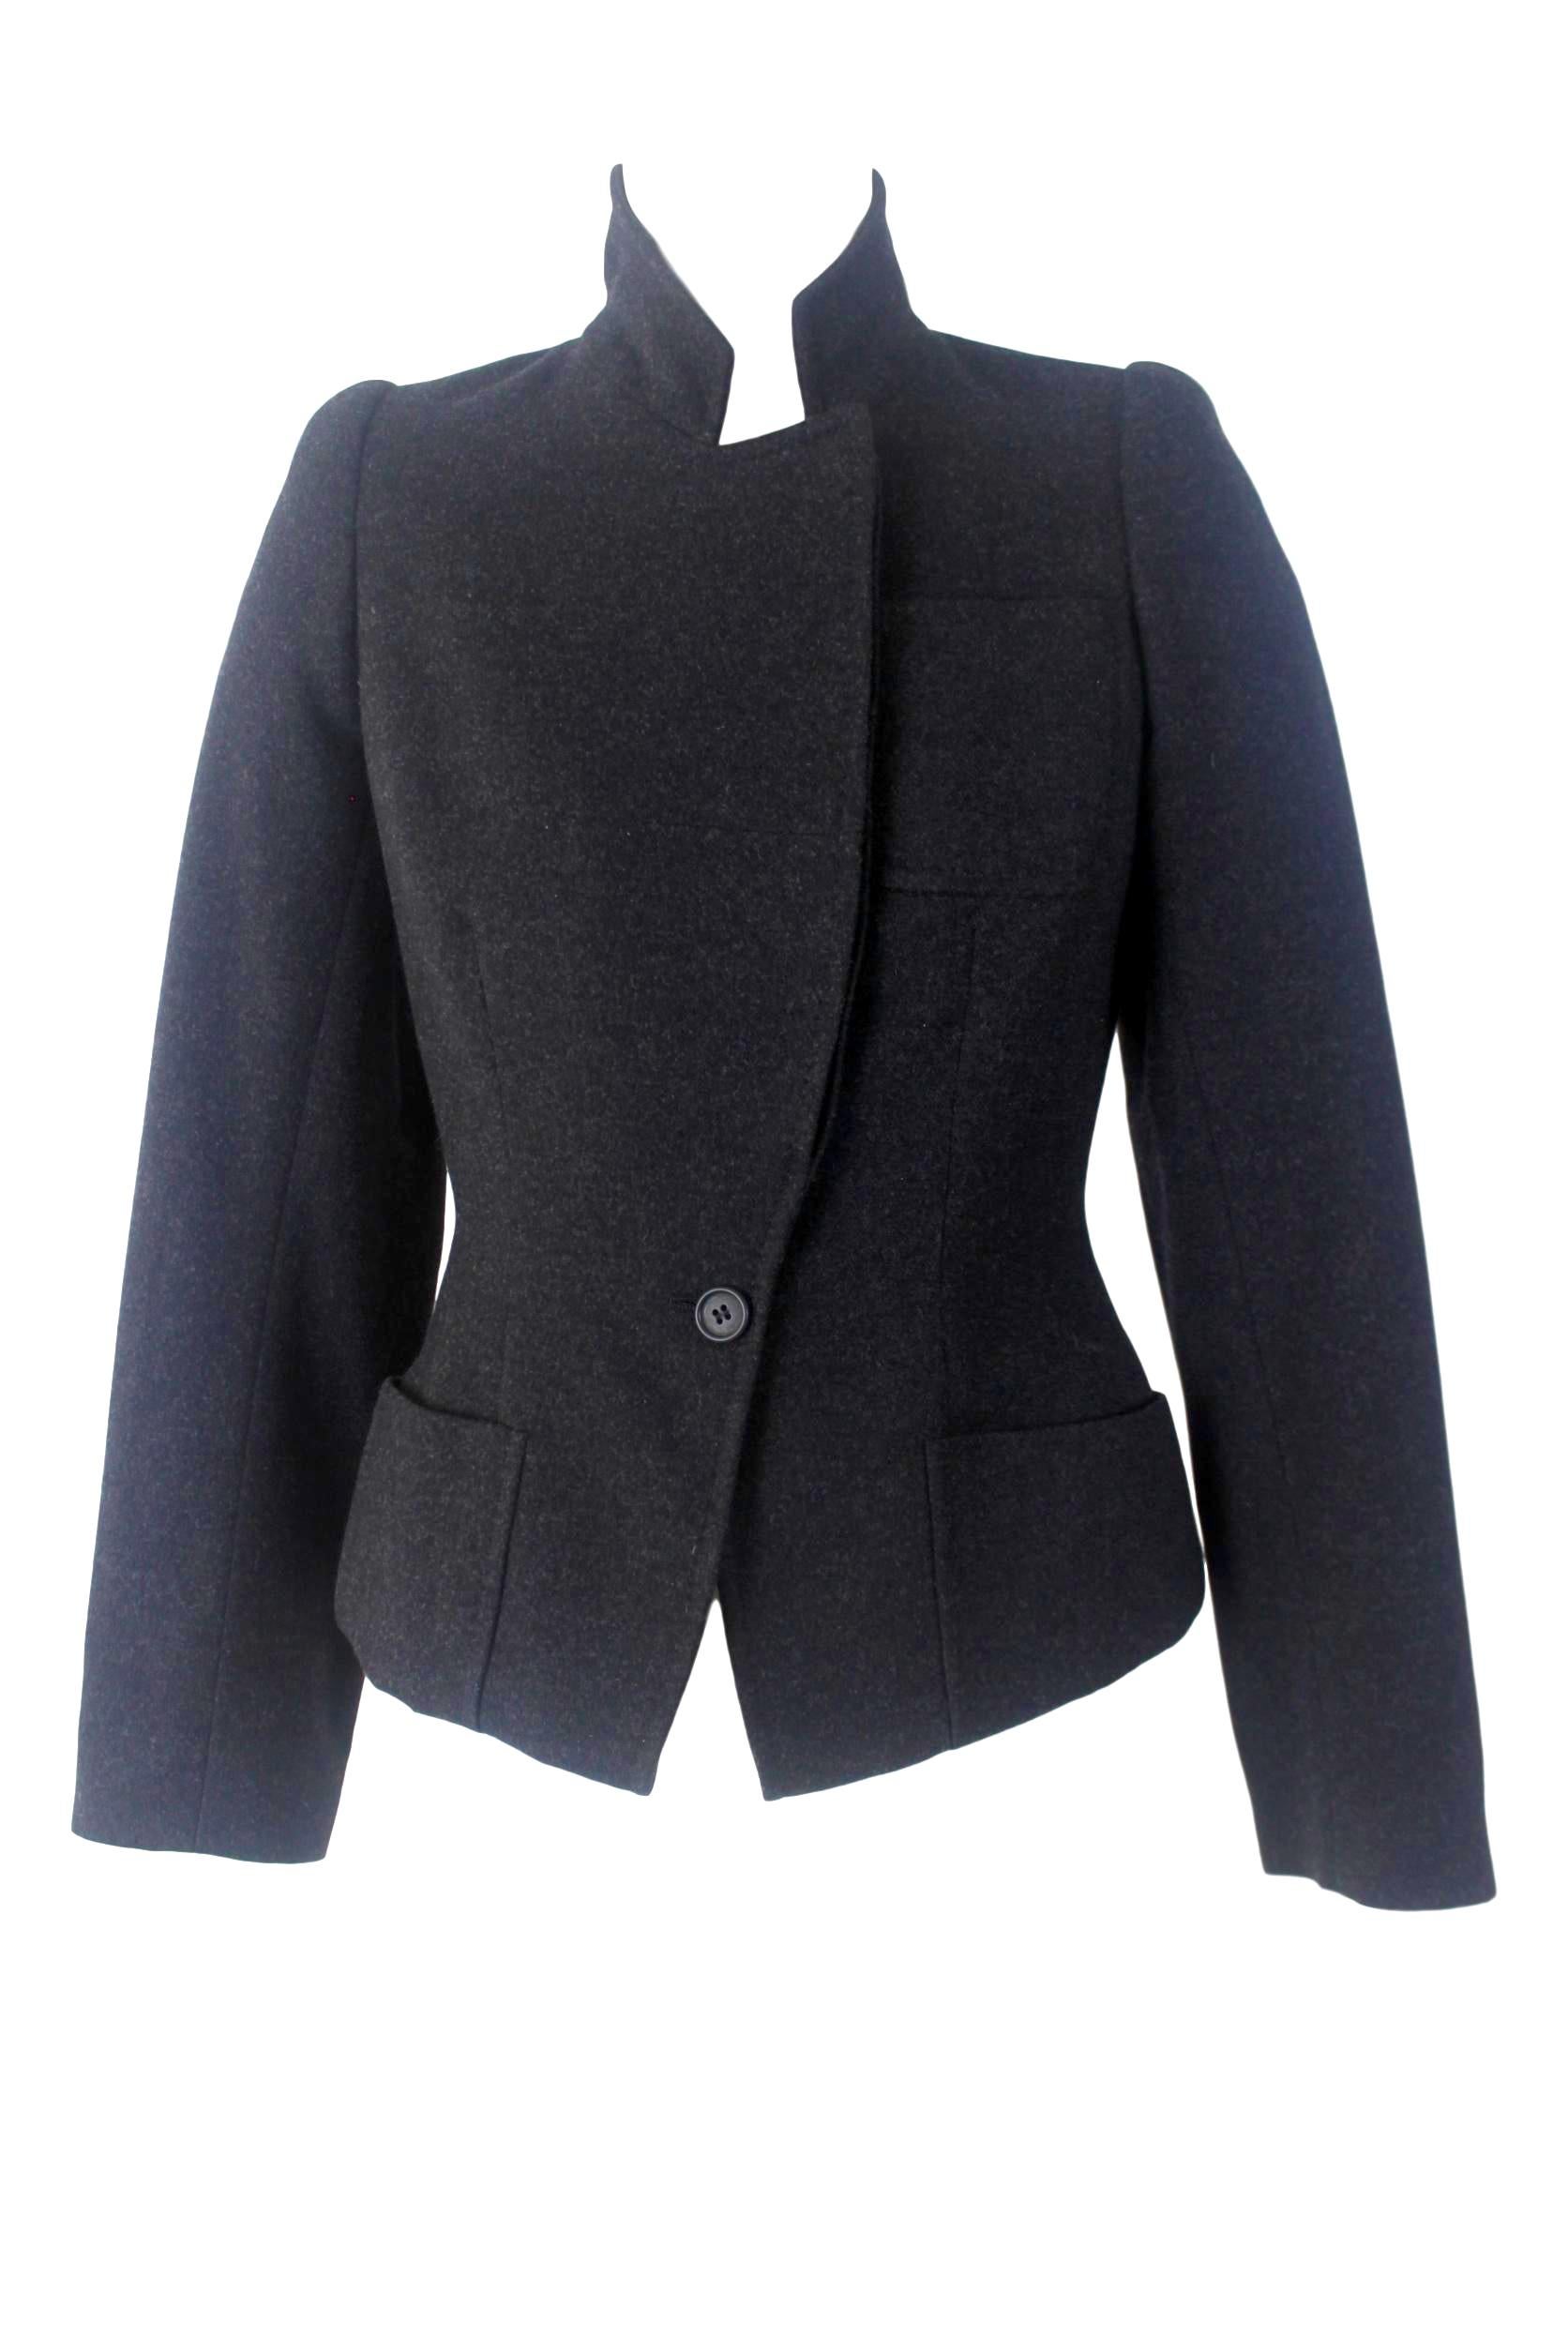 Alexander McQueen Vintage Black Wool and Cashmere Jacket In Excellent Condition For Sale In Bath, GB